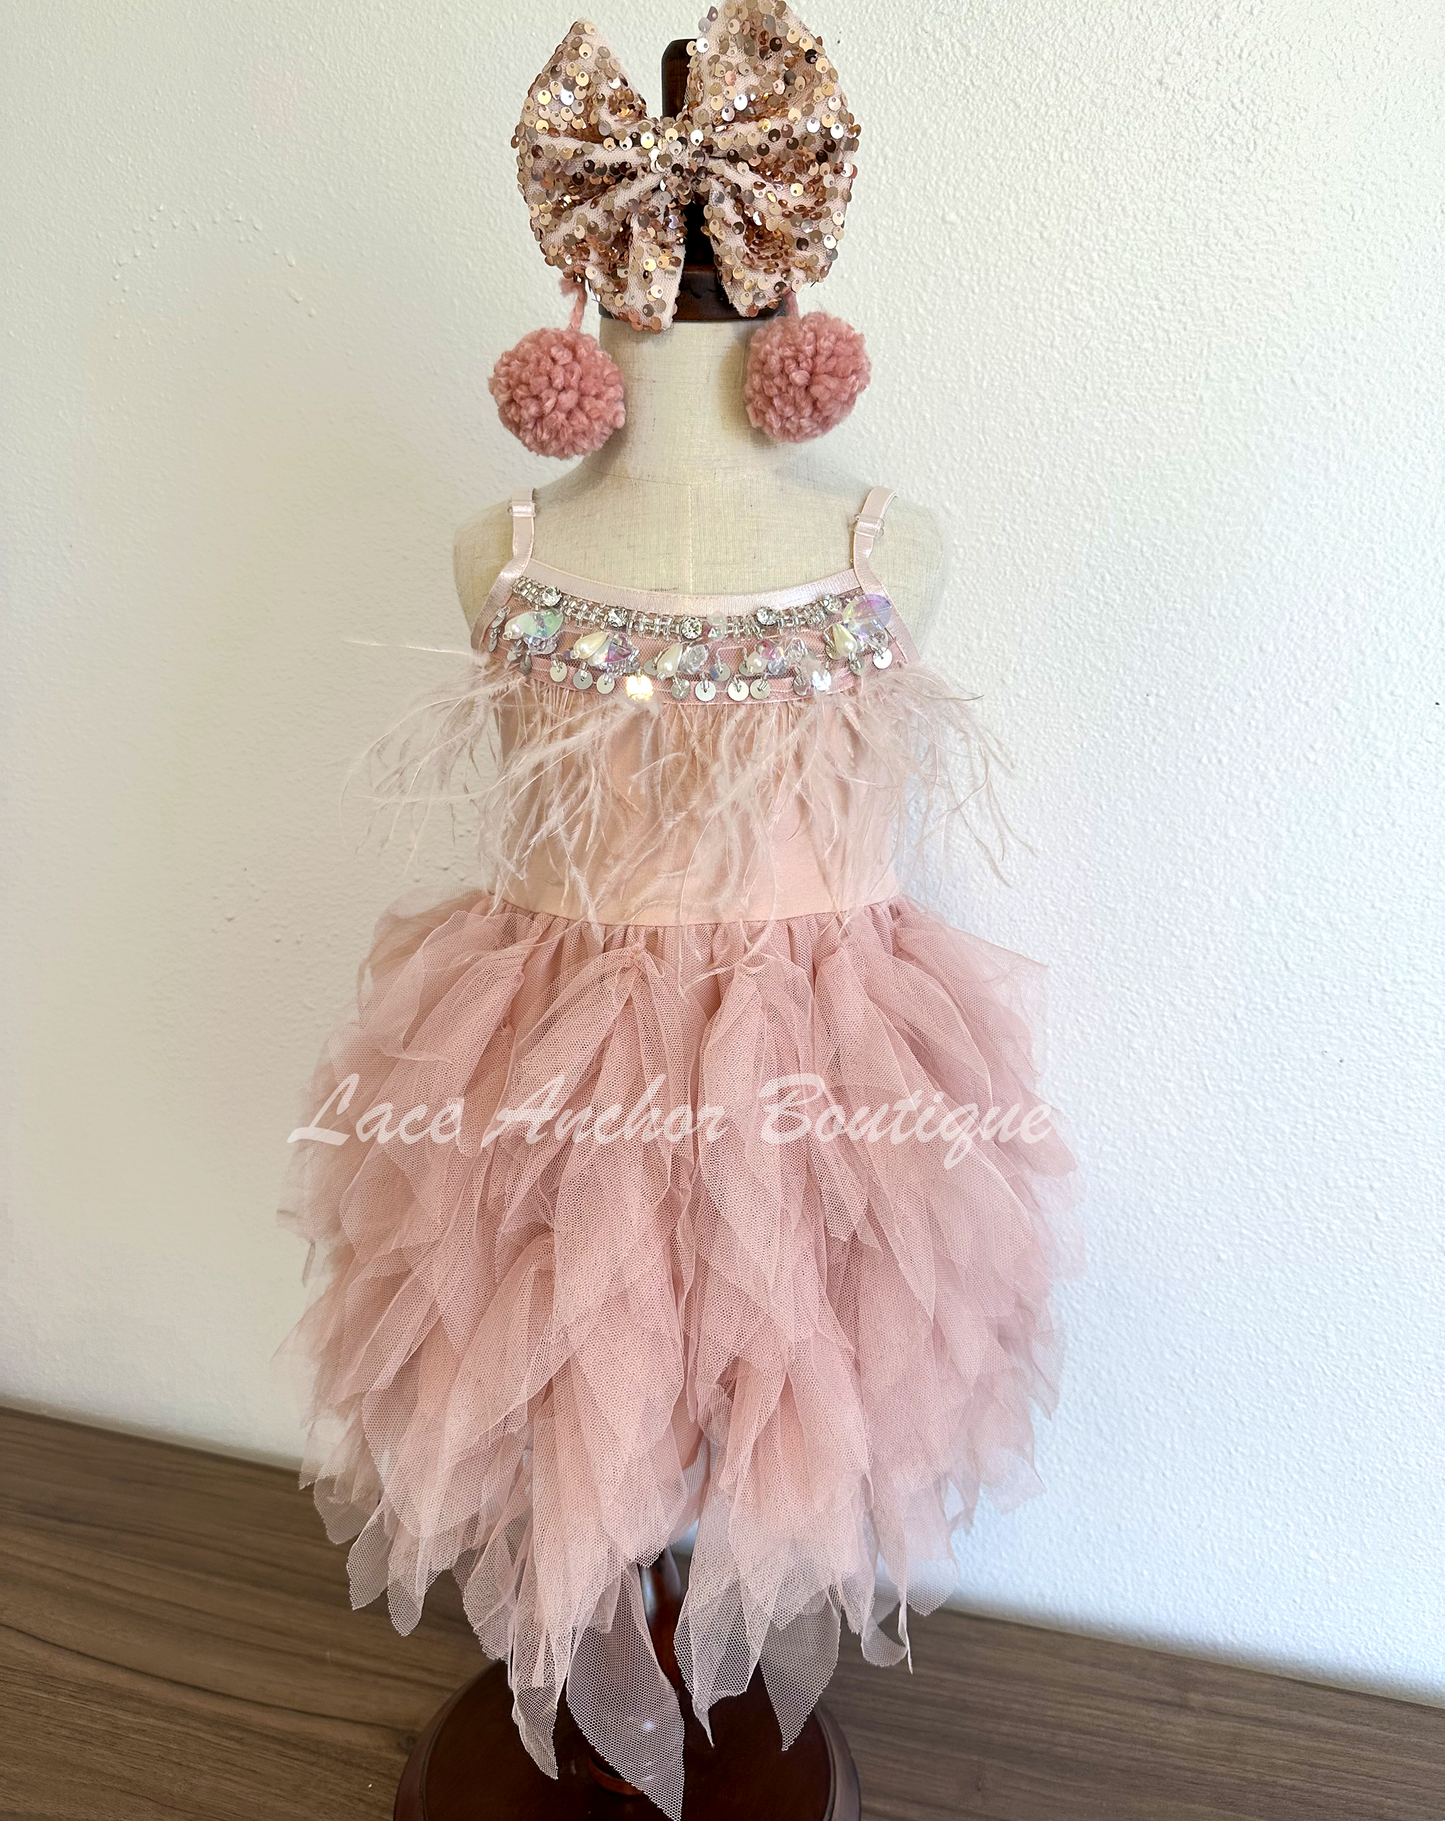 mauve rose pink fringe layered ruffled tulle skirt girl dress. Girls birthday princess dress with feathers, rhinestones, and sequins for toddlers. Youth party outfit with adjustable straps.